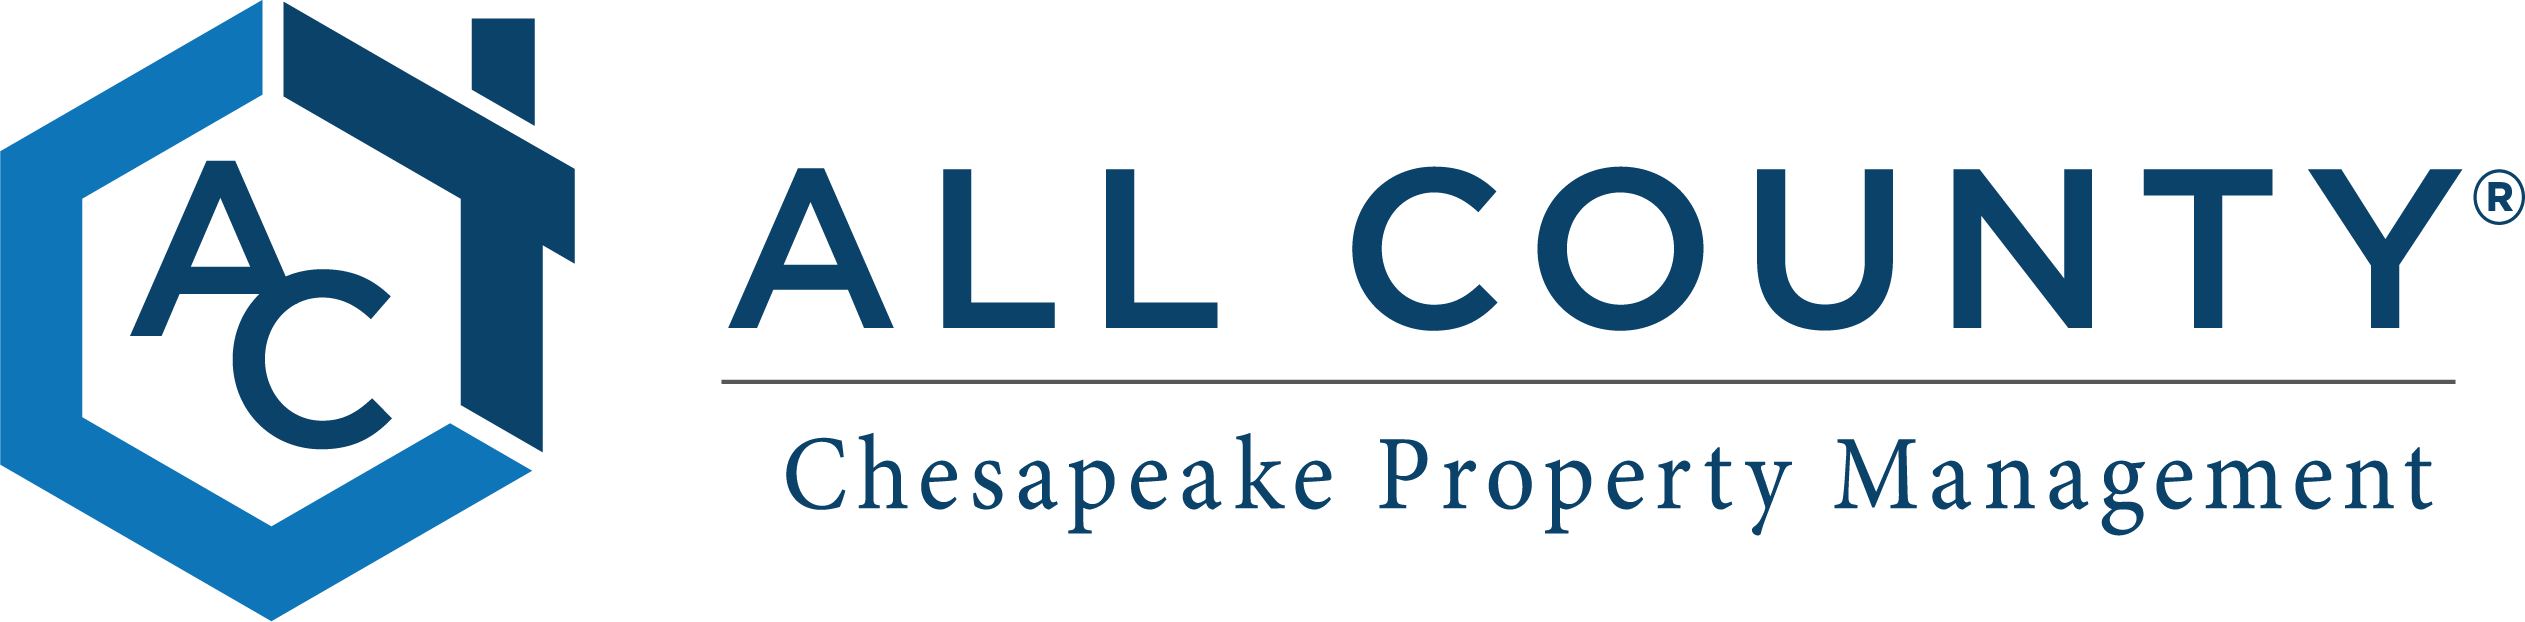 All County Chesapeake Property Management